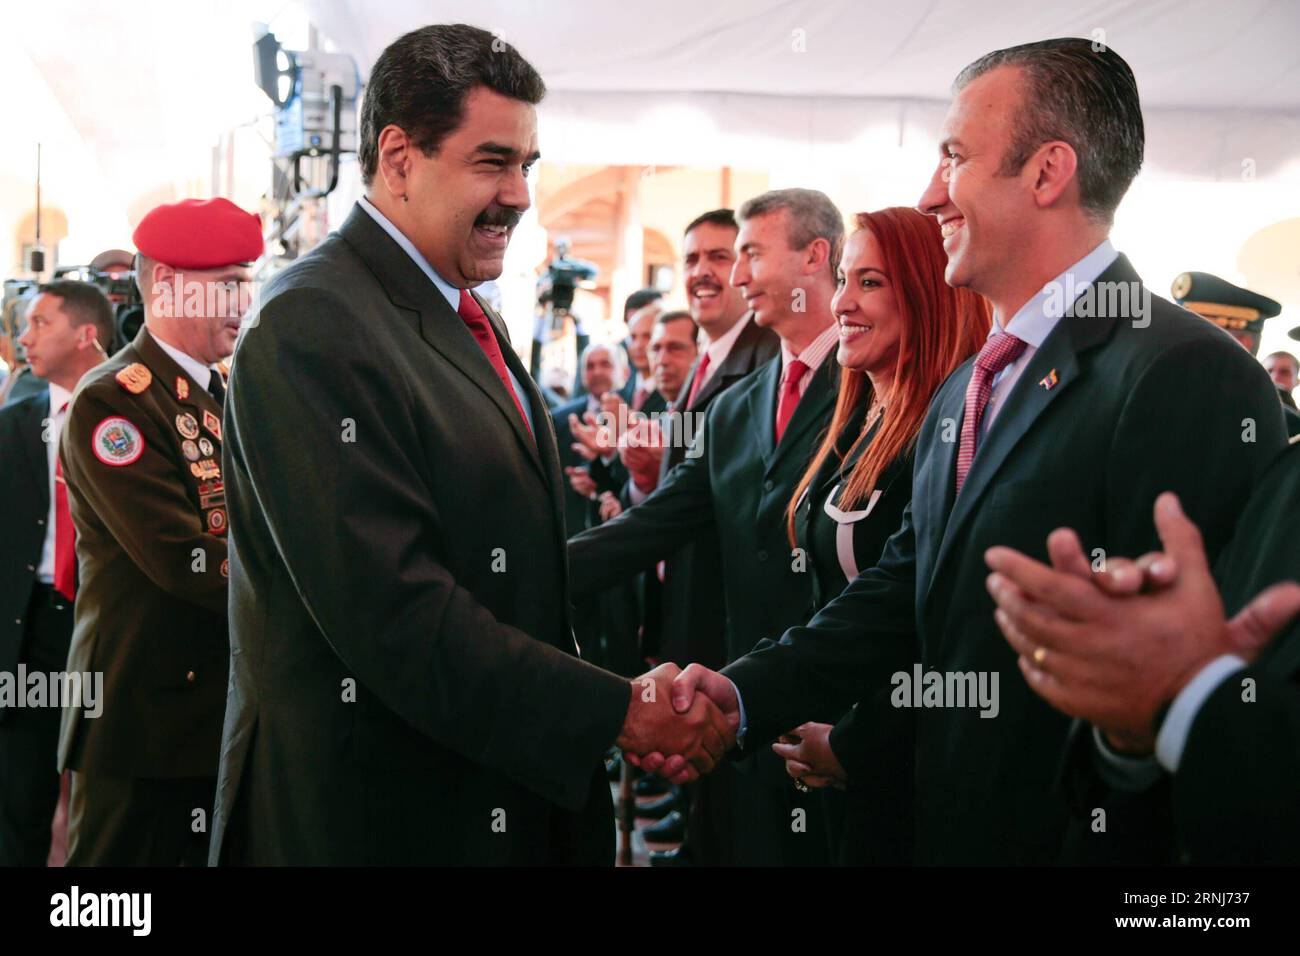 170104 -- CARACAS, Jan. 4, 2017 -- Venezuelan President Nicolas Maduro L F shakes hands with Vice President Tareck El Aissami in Caracas, Venezuela, Jan 4, 2017. Nicolas Maduro on Wednesday appointed Tareck El Aissami, 43, as vice president to replace Aristobulo Isturiz, who became minister for communes and social movements. Presidential Press/AVN djj VENEZUELA-CARACAS-NEW VICE PRESIDENT e AVN PUBLICATIONxNOTxINxCHN Stock Photo